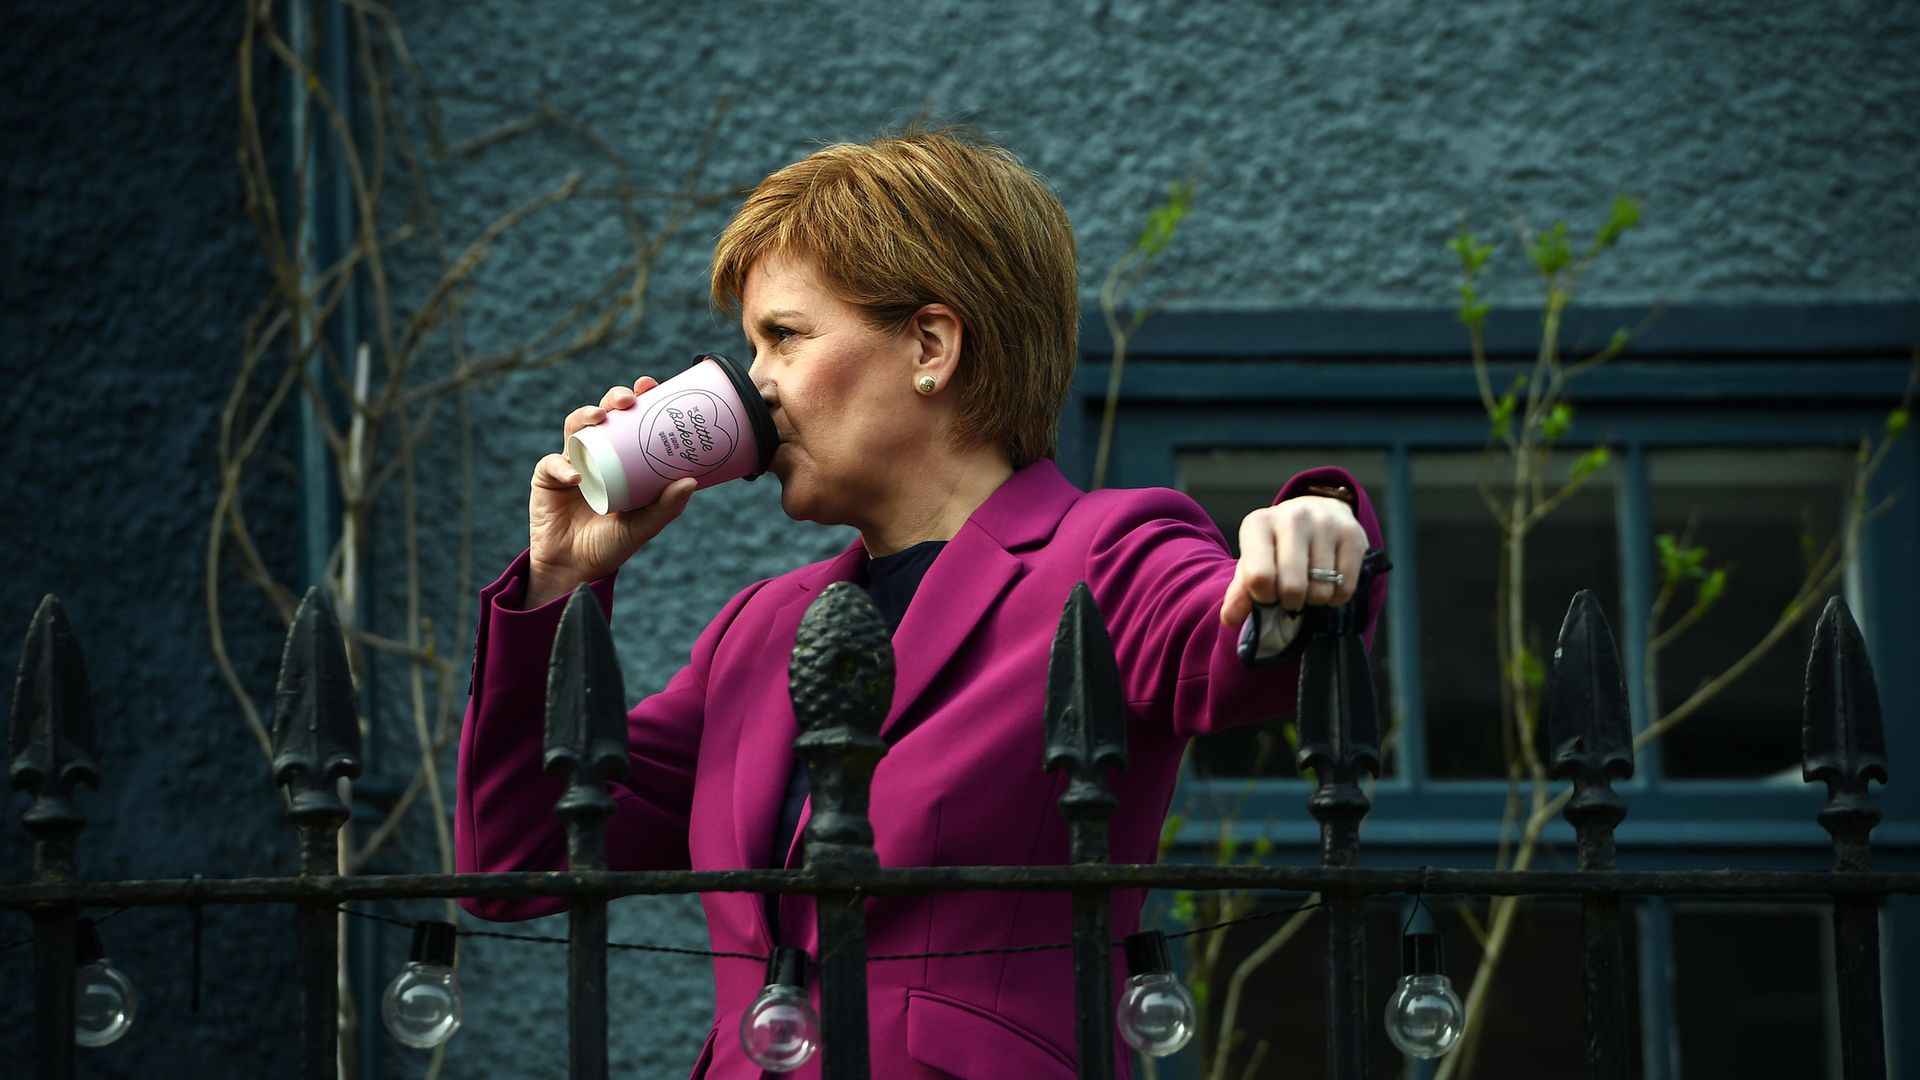 Scotland's First Minister Nicola Sturgeon, leader of the Scottish National Party (SNP), holds a hot drink while out campaigning for the Scottish Parliamentary election - Credit: PA